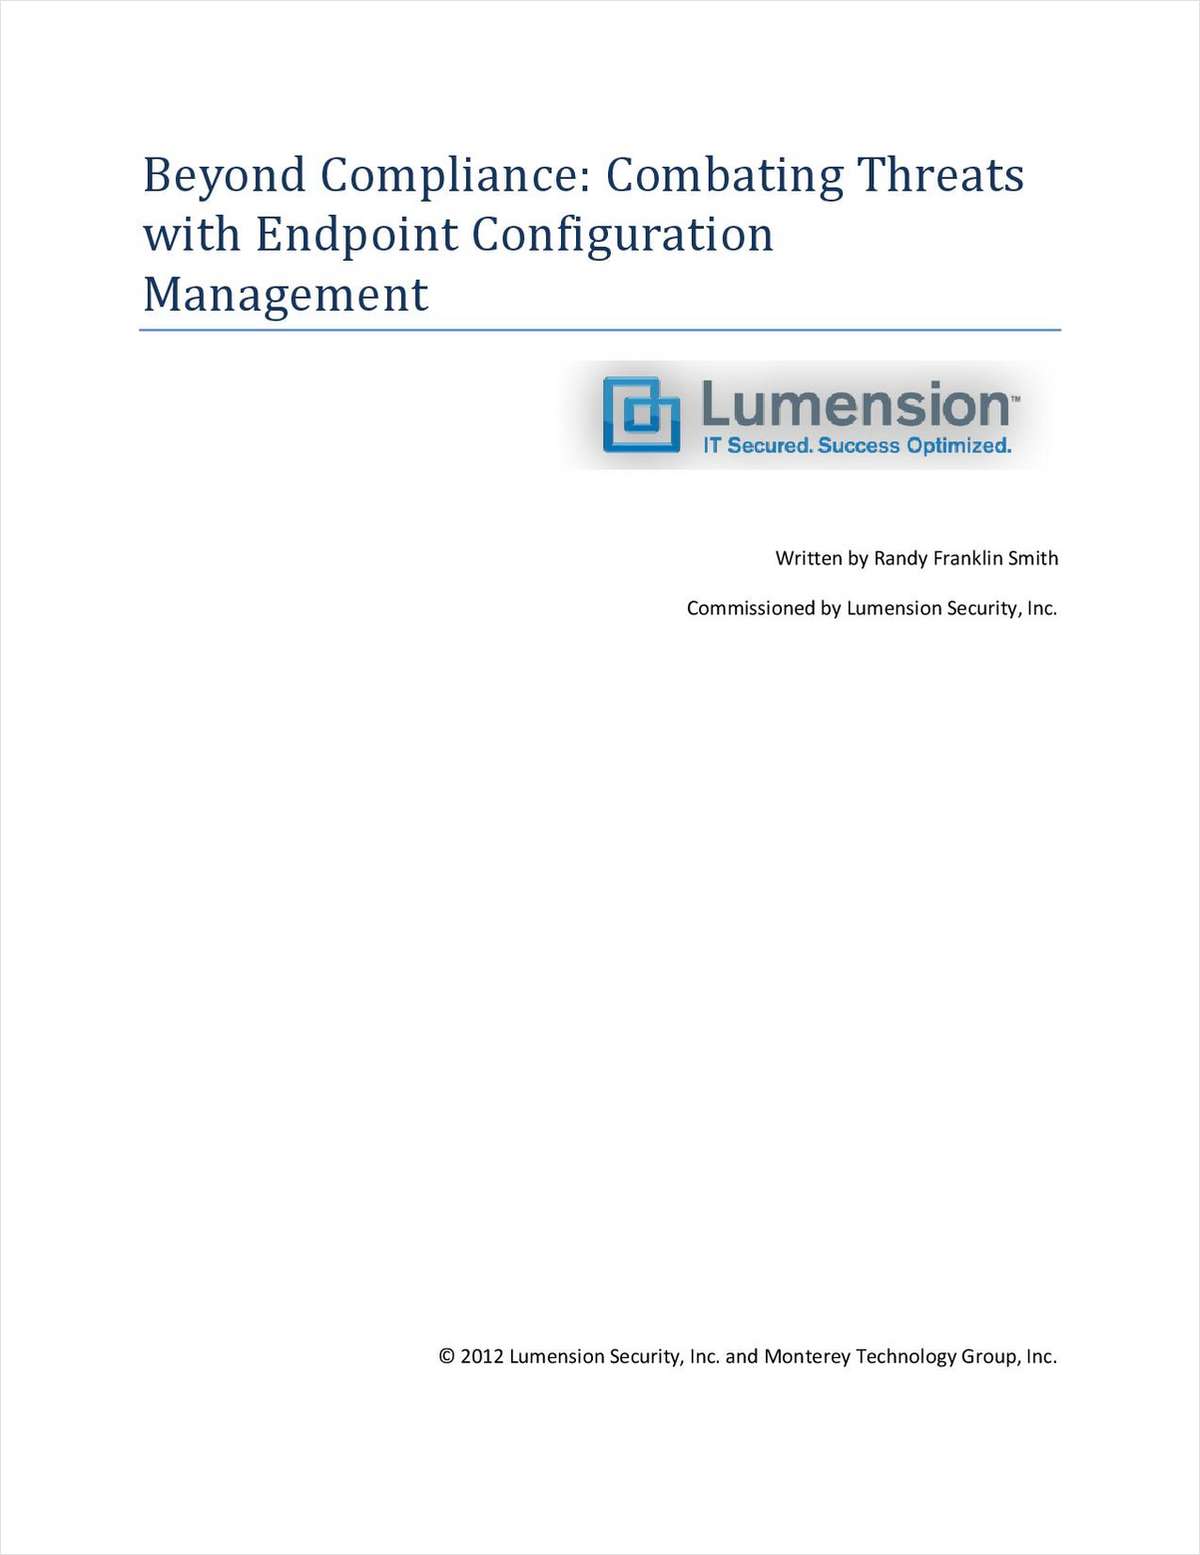 Beyond Compliance: Combating Threats with Endpoint Configuration Management